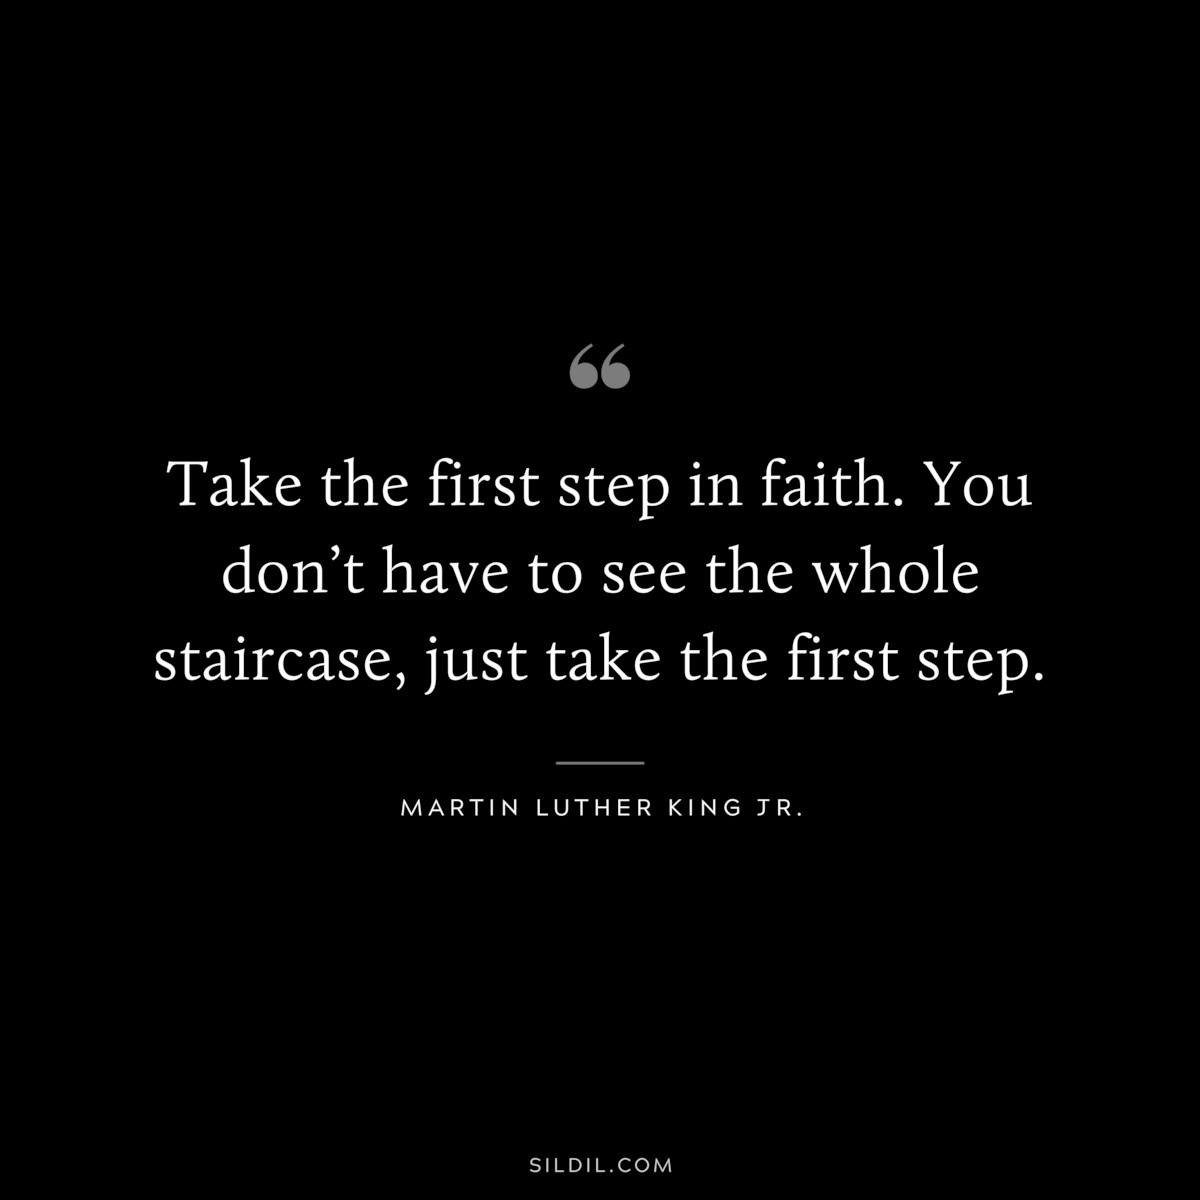 Take the first step in faith. You don’t have to see the whole staircase, just take the first step. ― Martin Luther King Jr.